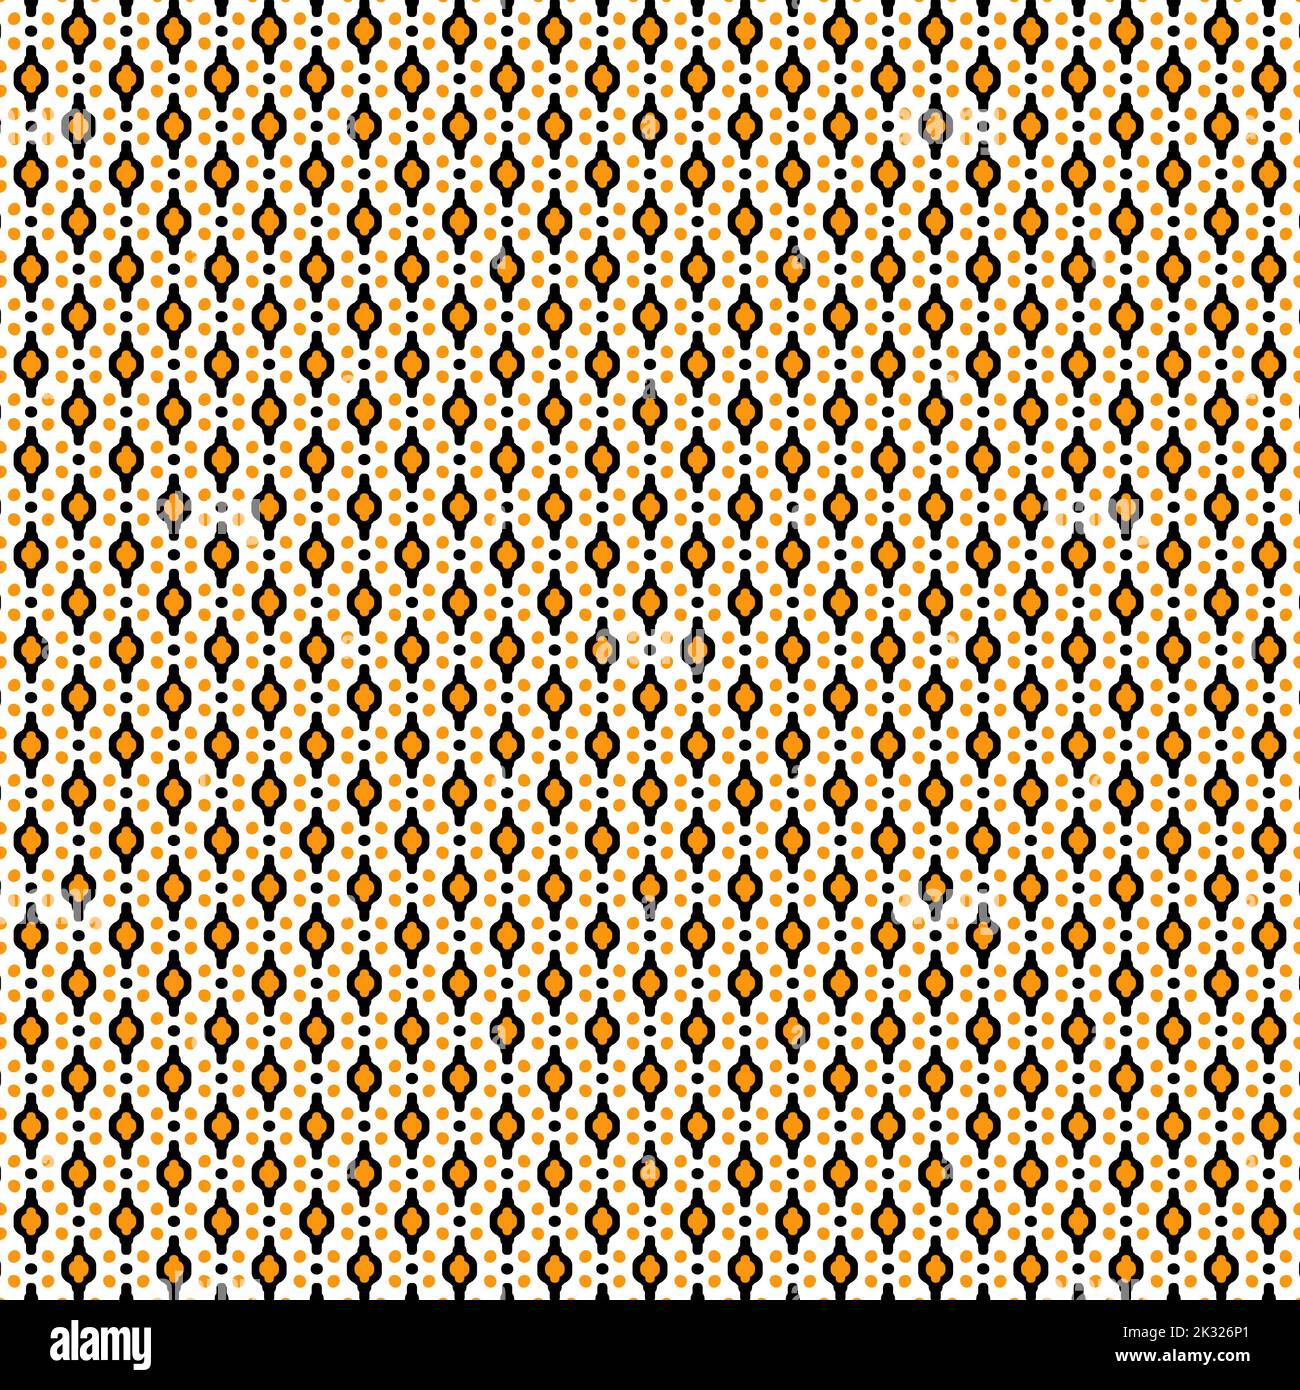 Seamless abstract pattern design with free-hand orange dots and abstract Arabian element modern styles on white background, graphic pattern for textil Stock Photo